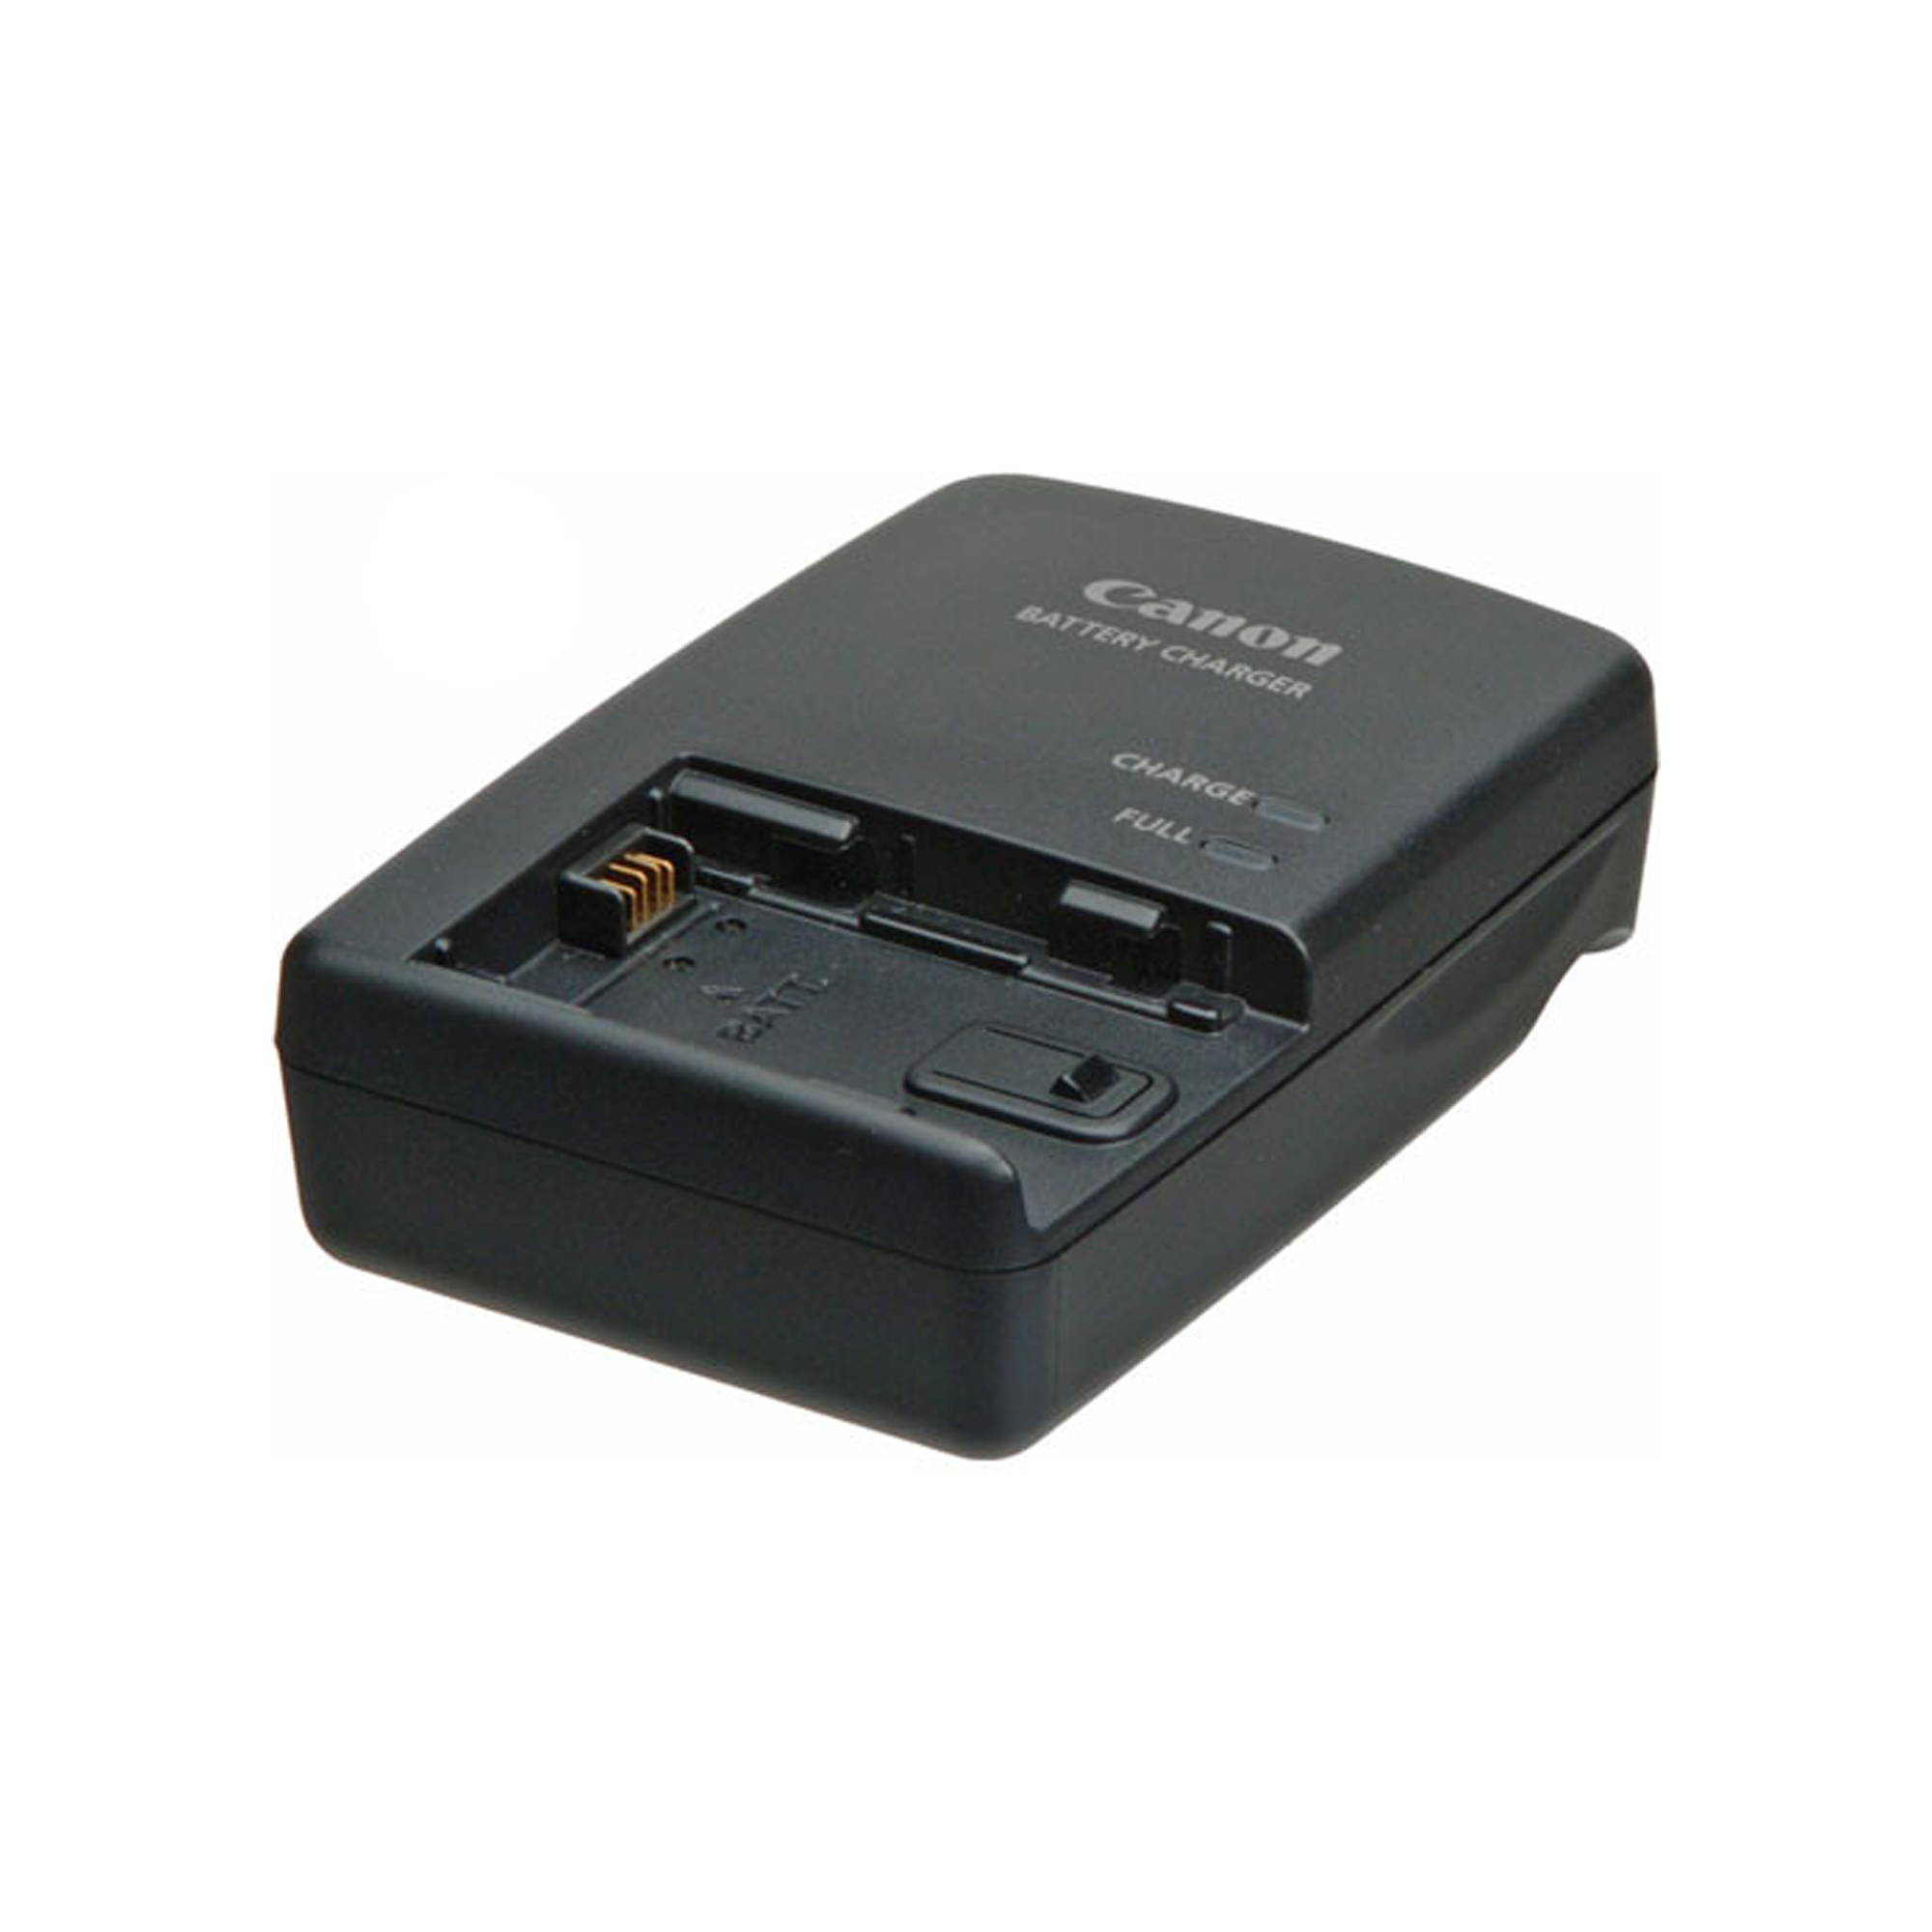 Canon CG-800 Charger